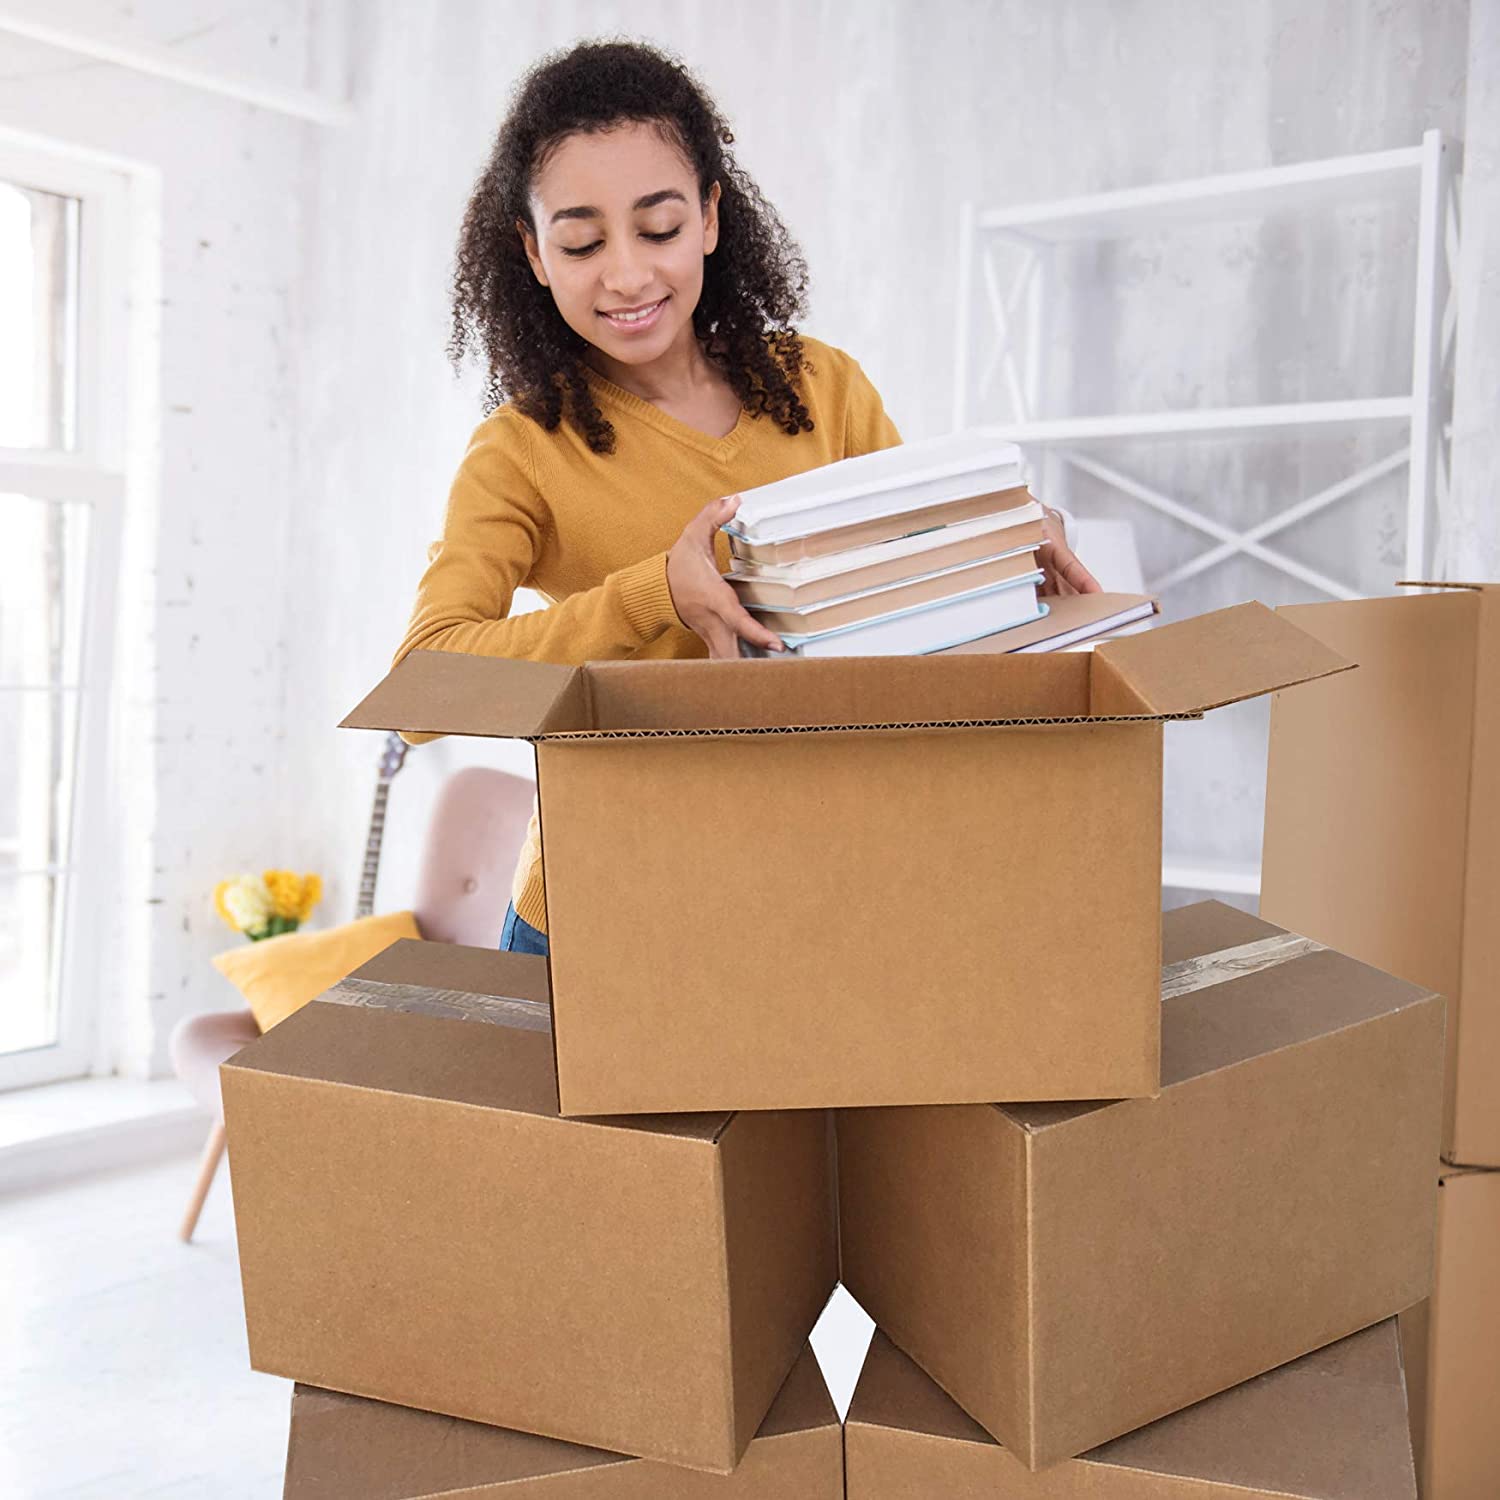 Where To Buy The Cheapest Moving Boxes